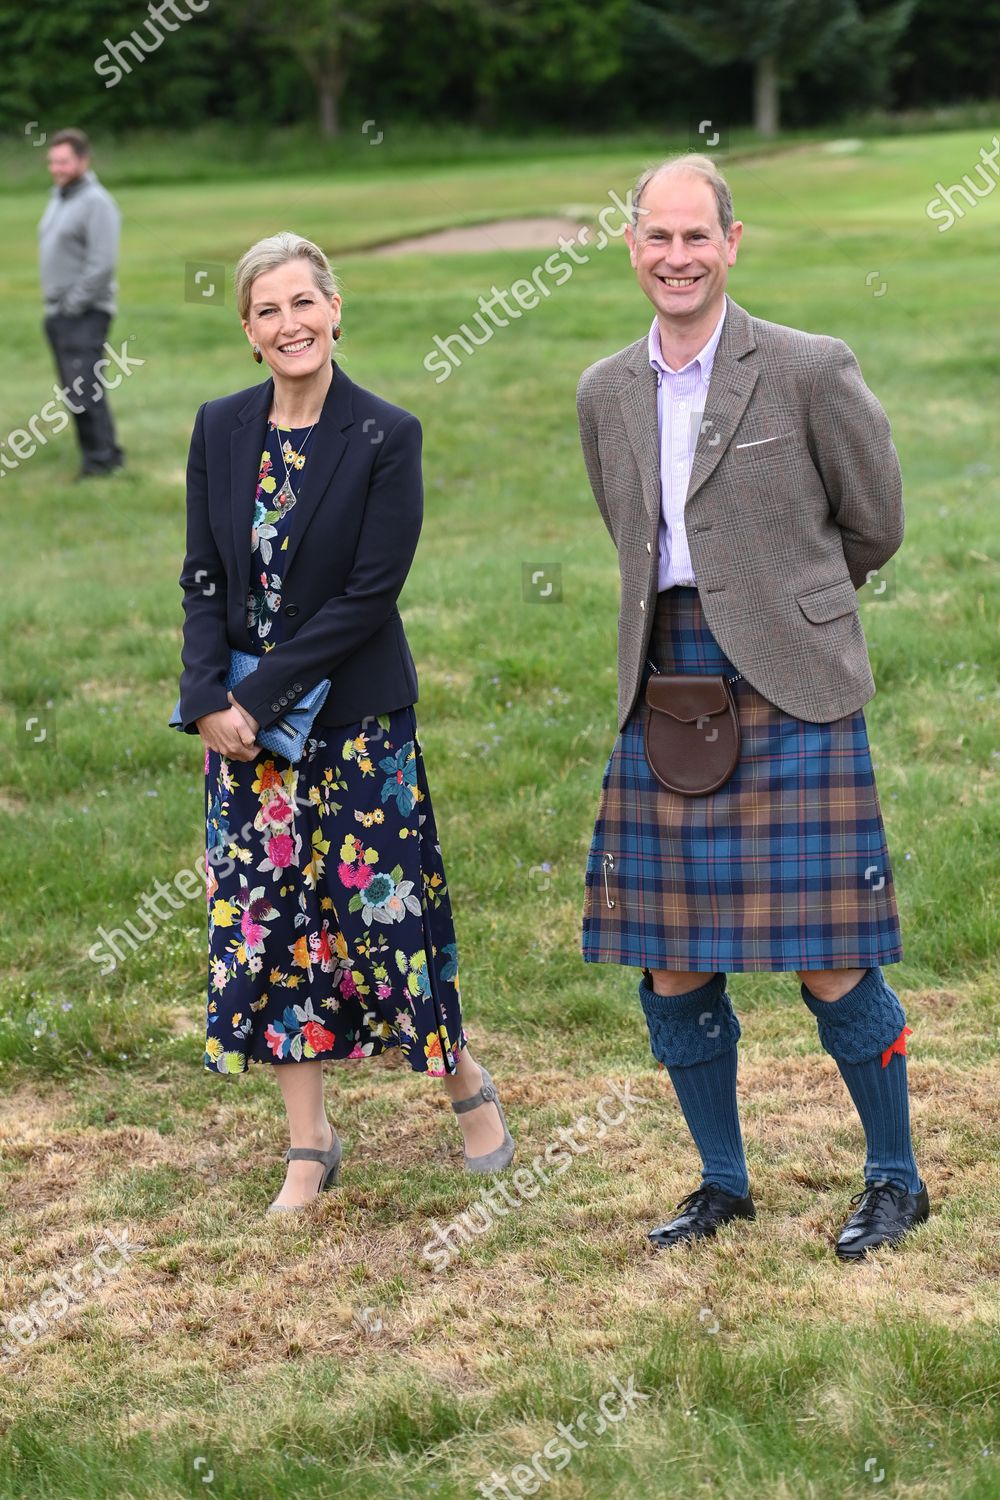 prince-edward-and-sophie-countess-of-wessex-visit-to-forfar-golf-club-scotland-uk-shutterstock-editorial-12172307c.jpg